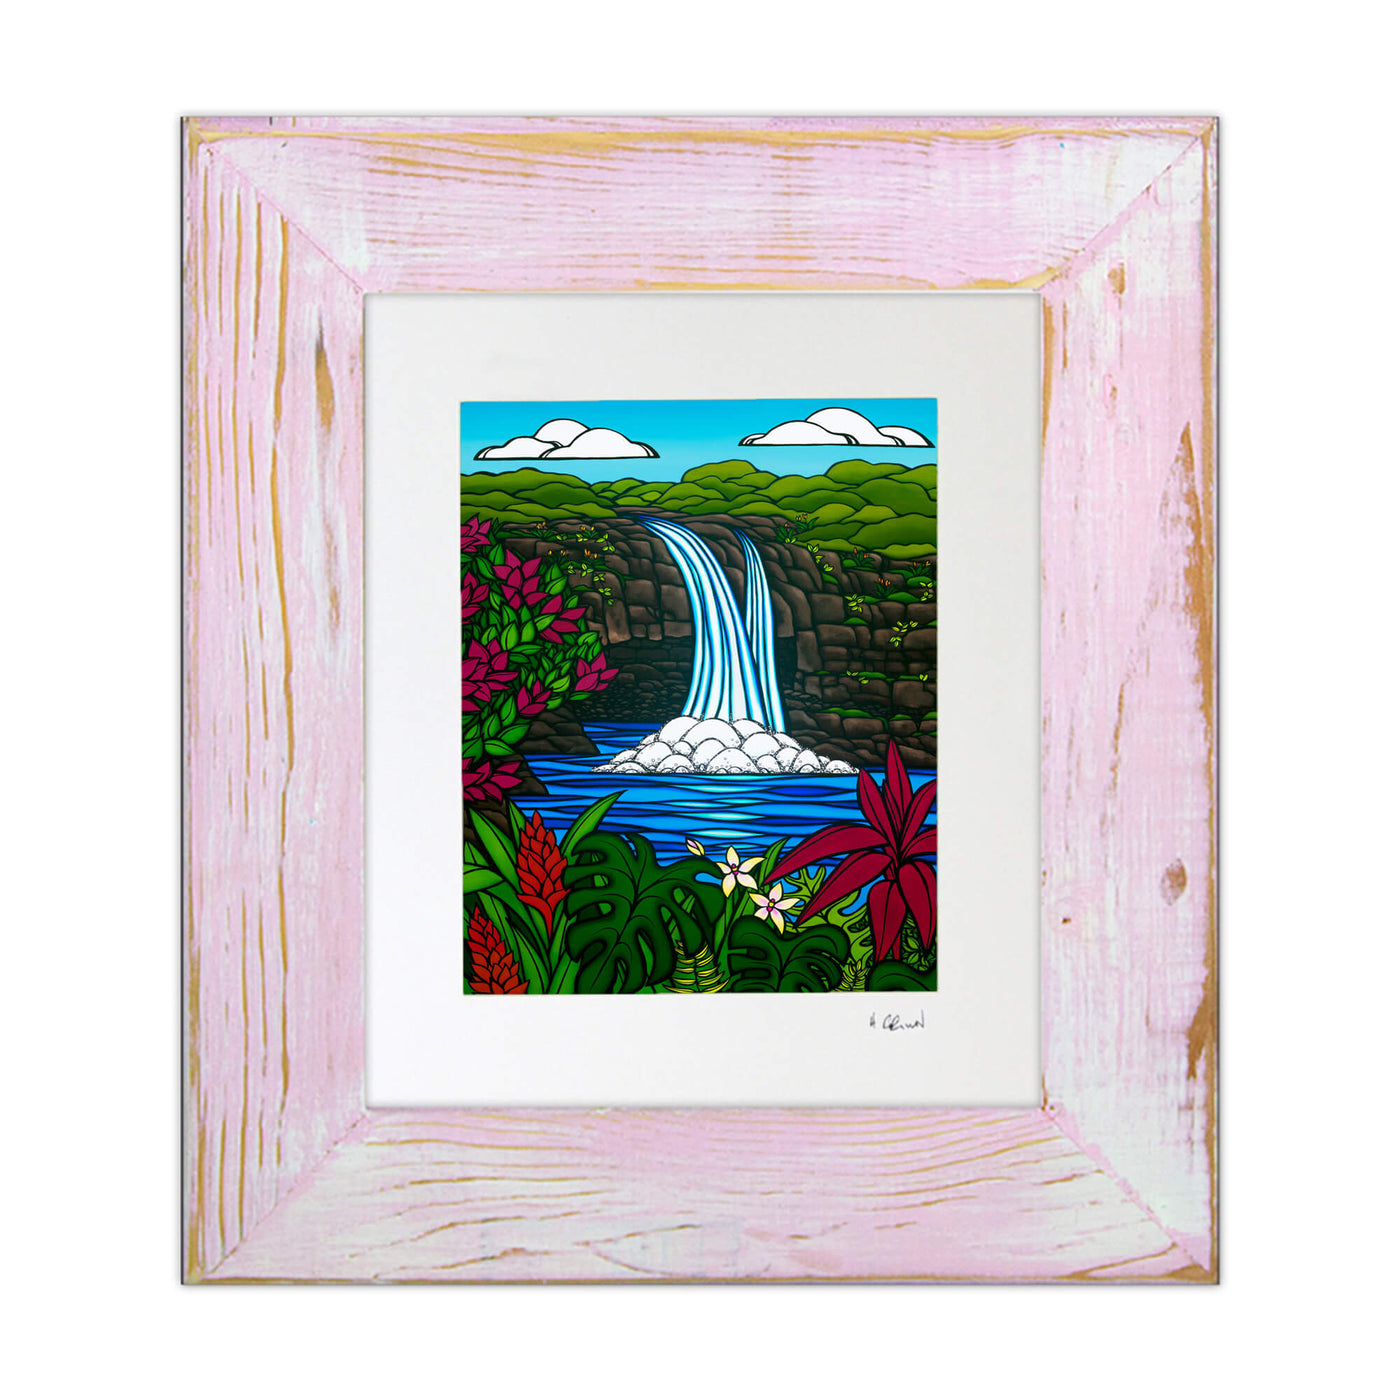 A framed matted art print featuring a tranquil pool, waterfall, tropical flowers, mountains, and a beautiful blue sky by Hawaii surf artist Heather Brown